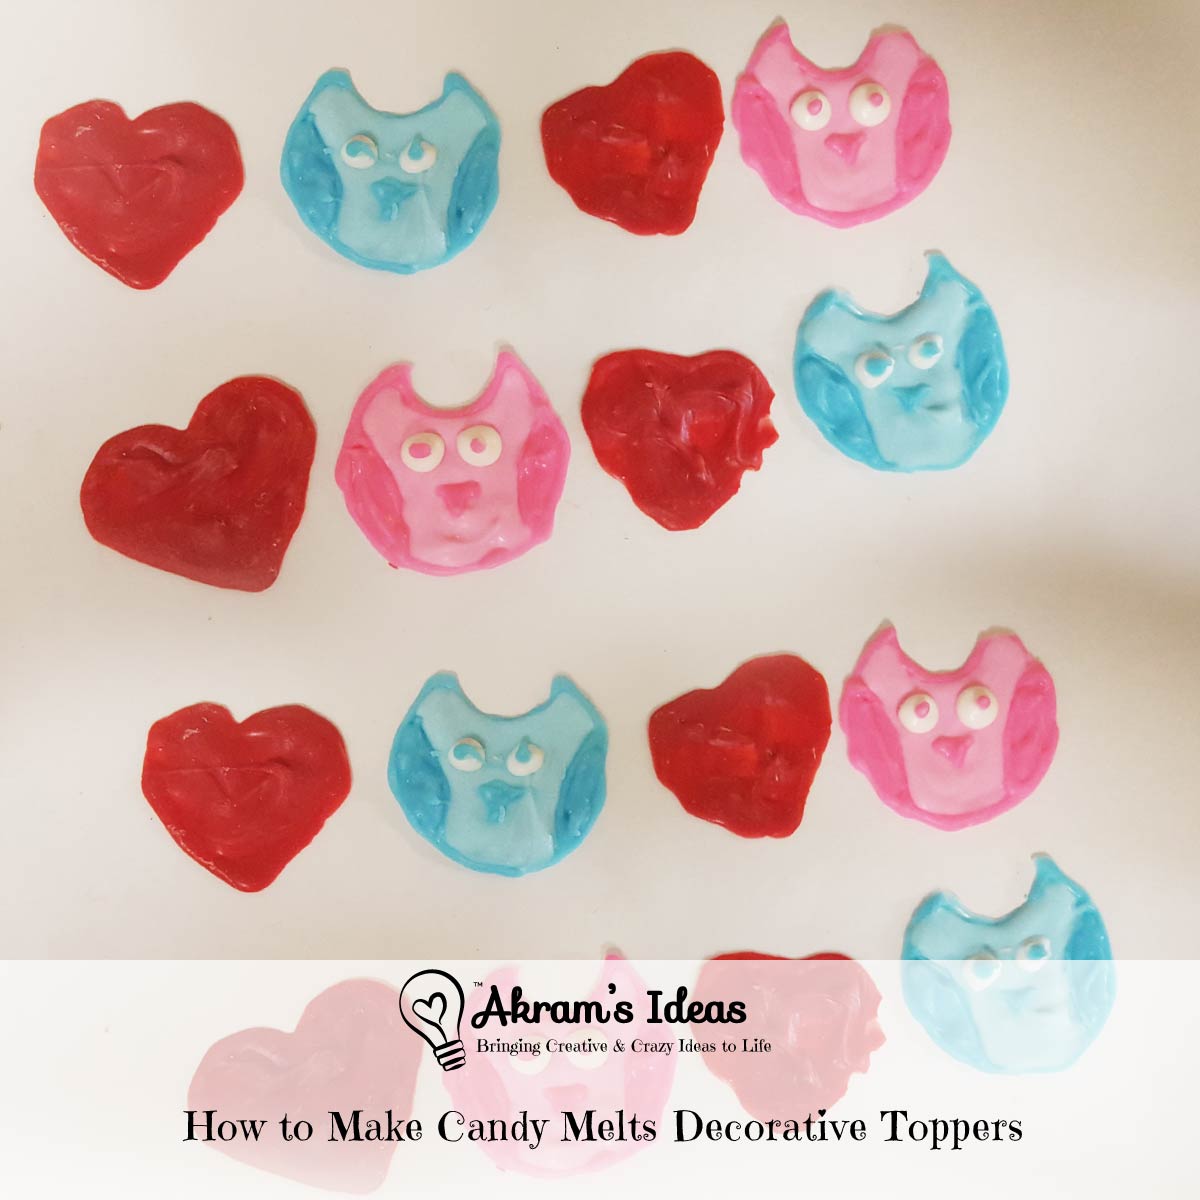 Akram's Ideas: How to Make Candy Melts Decorative Toppers